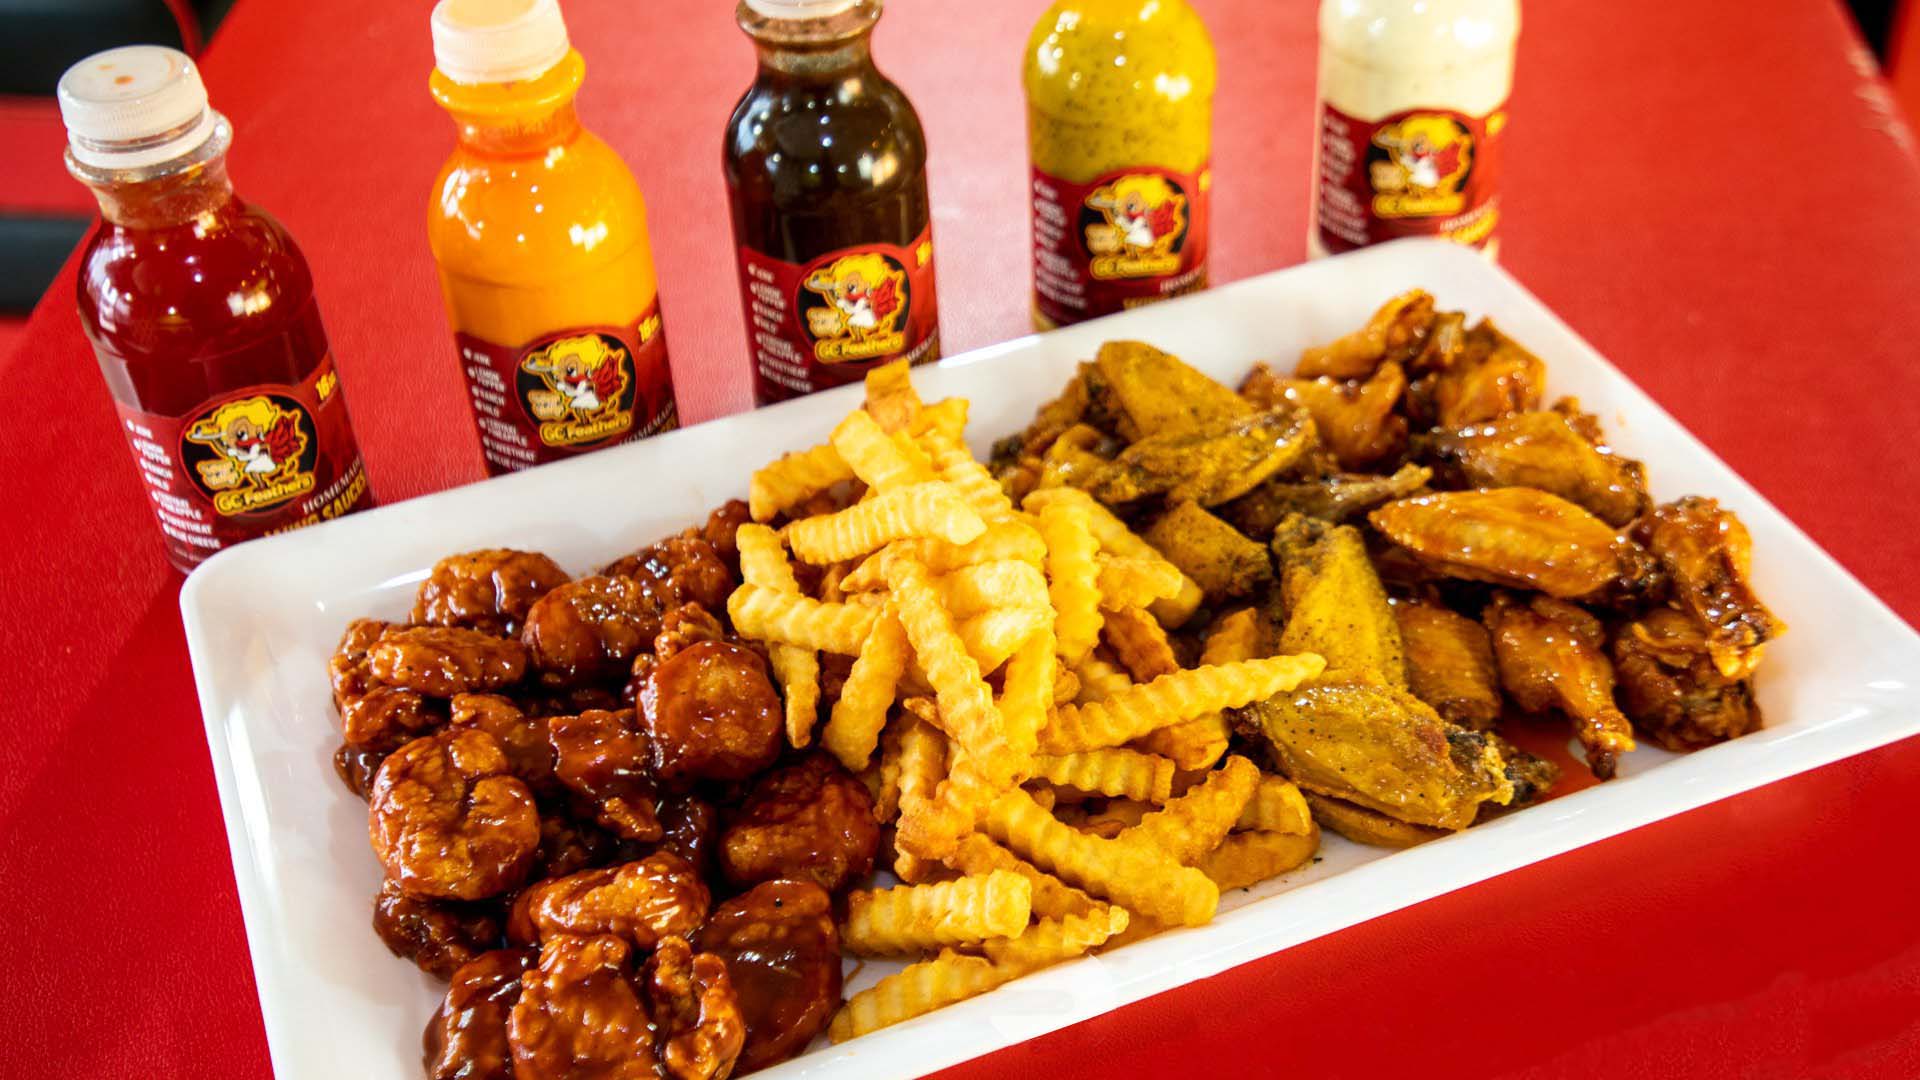 Platter of assorted chicken wings and french fries with condiment bottles in the background.